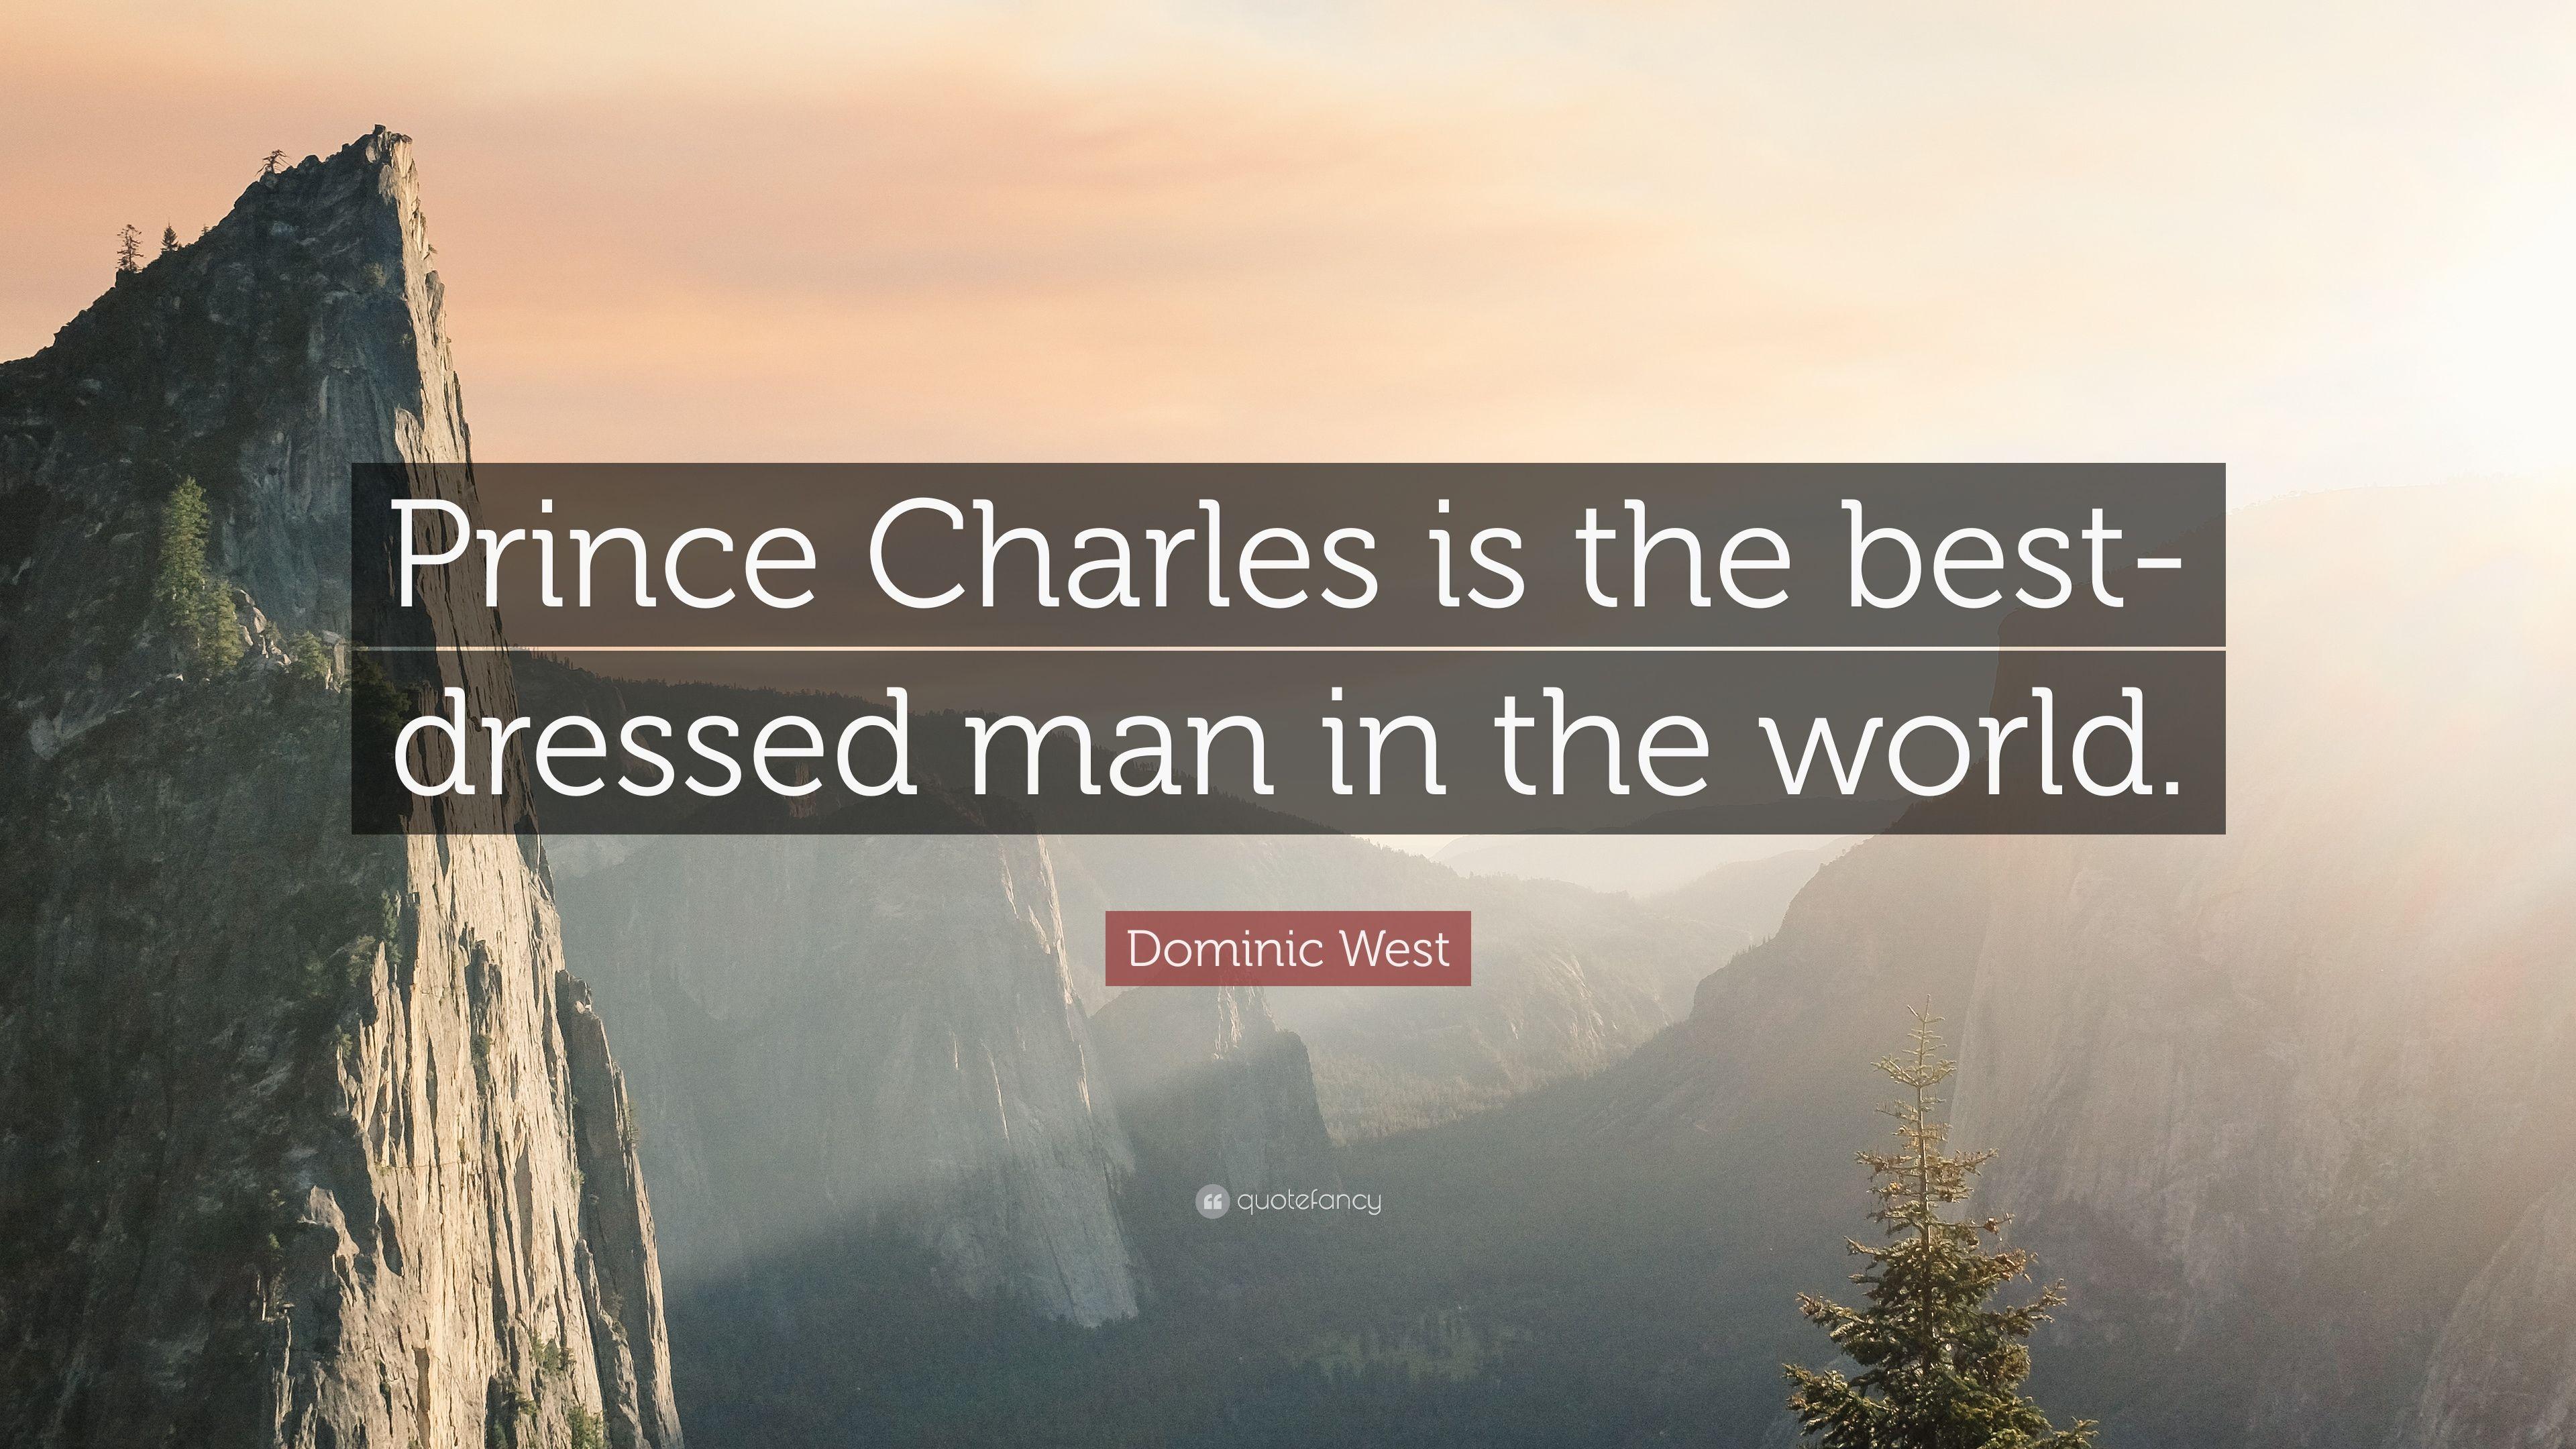 Dominic West Quote: “Prince Charles Is The Best Dressed Man In